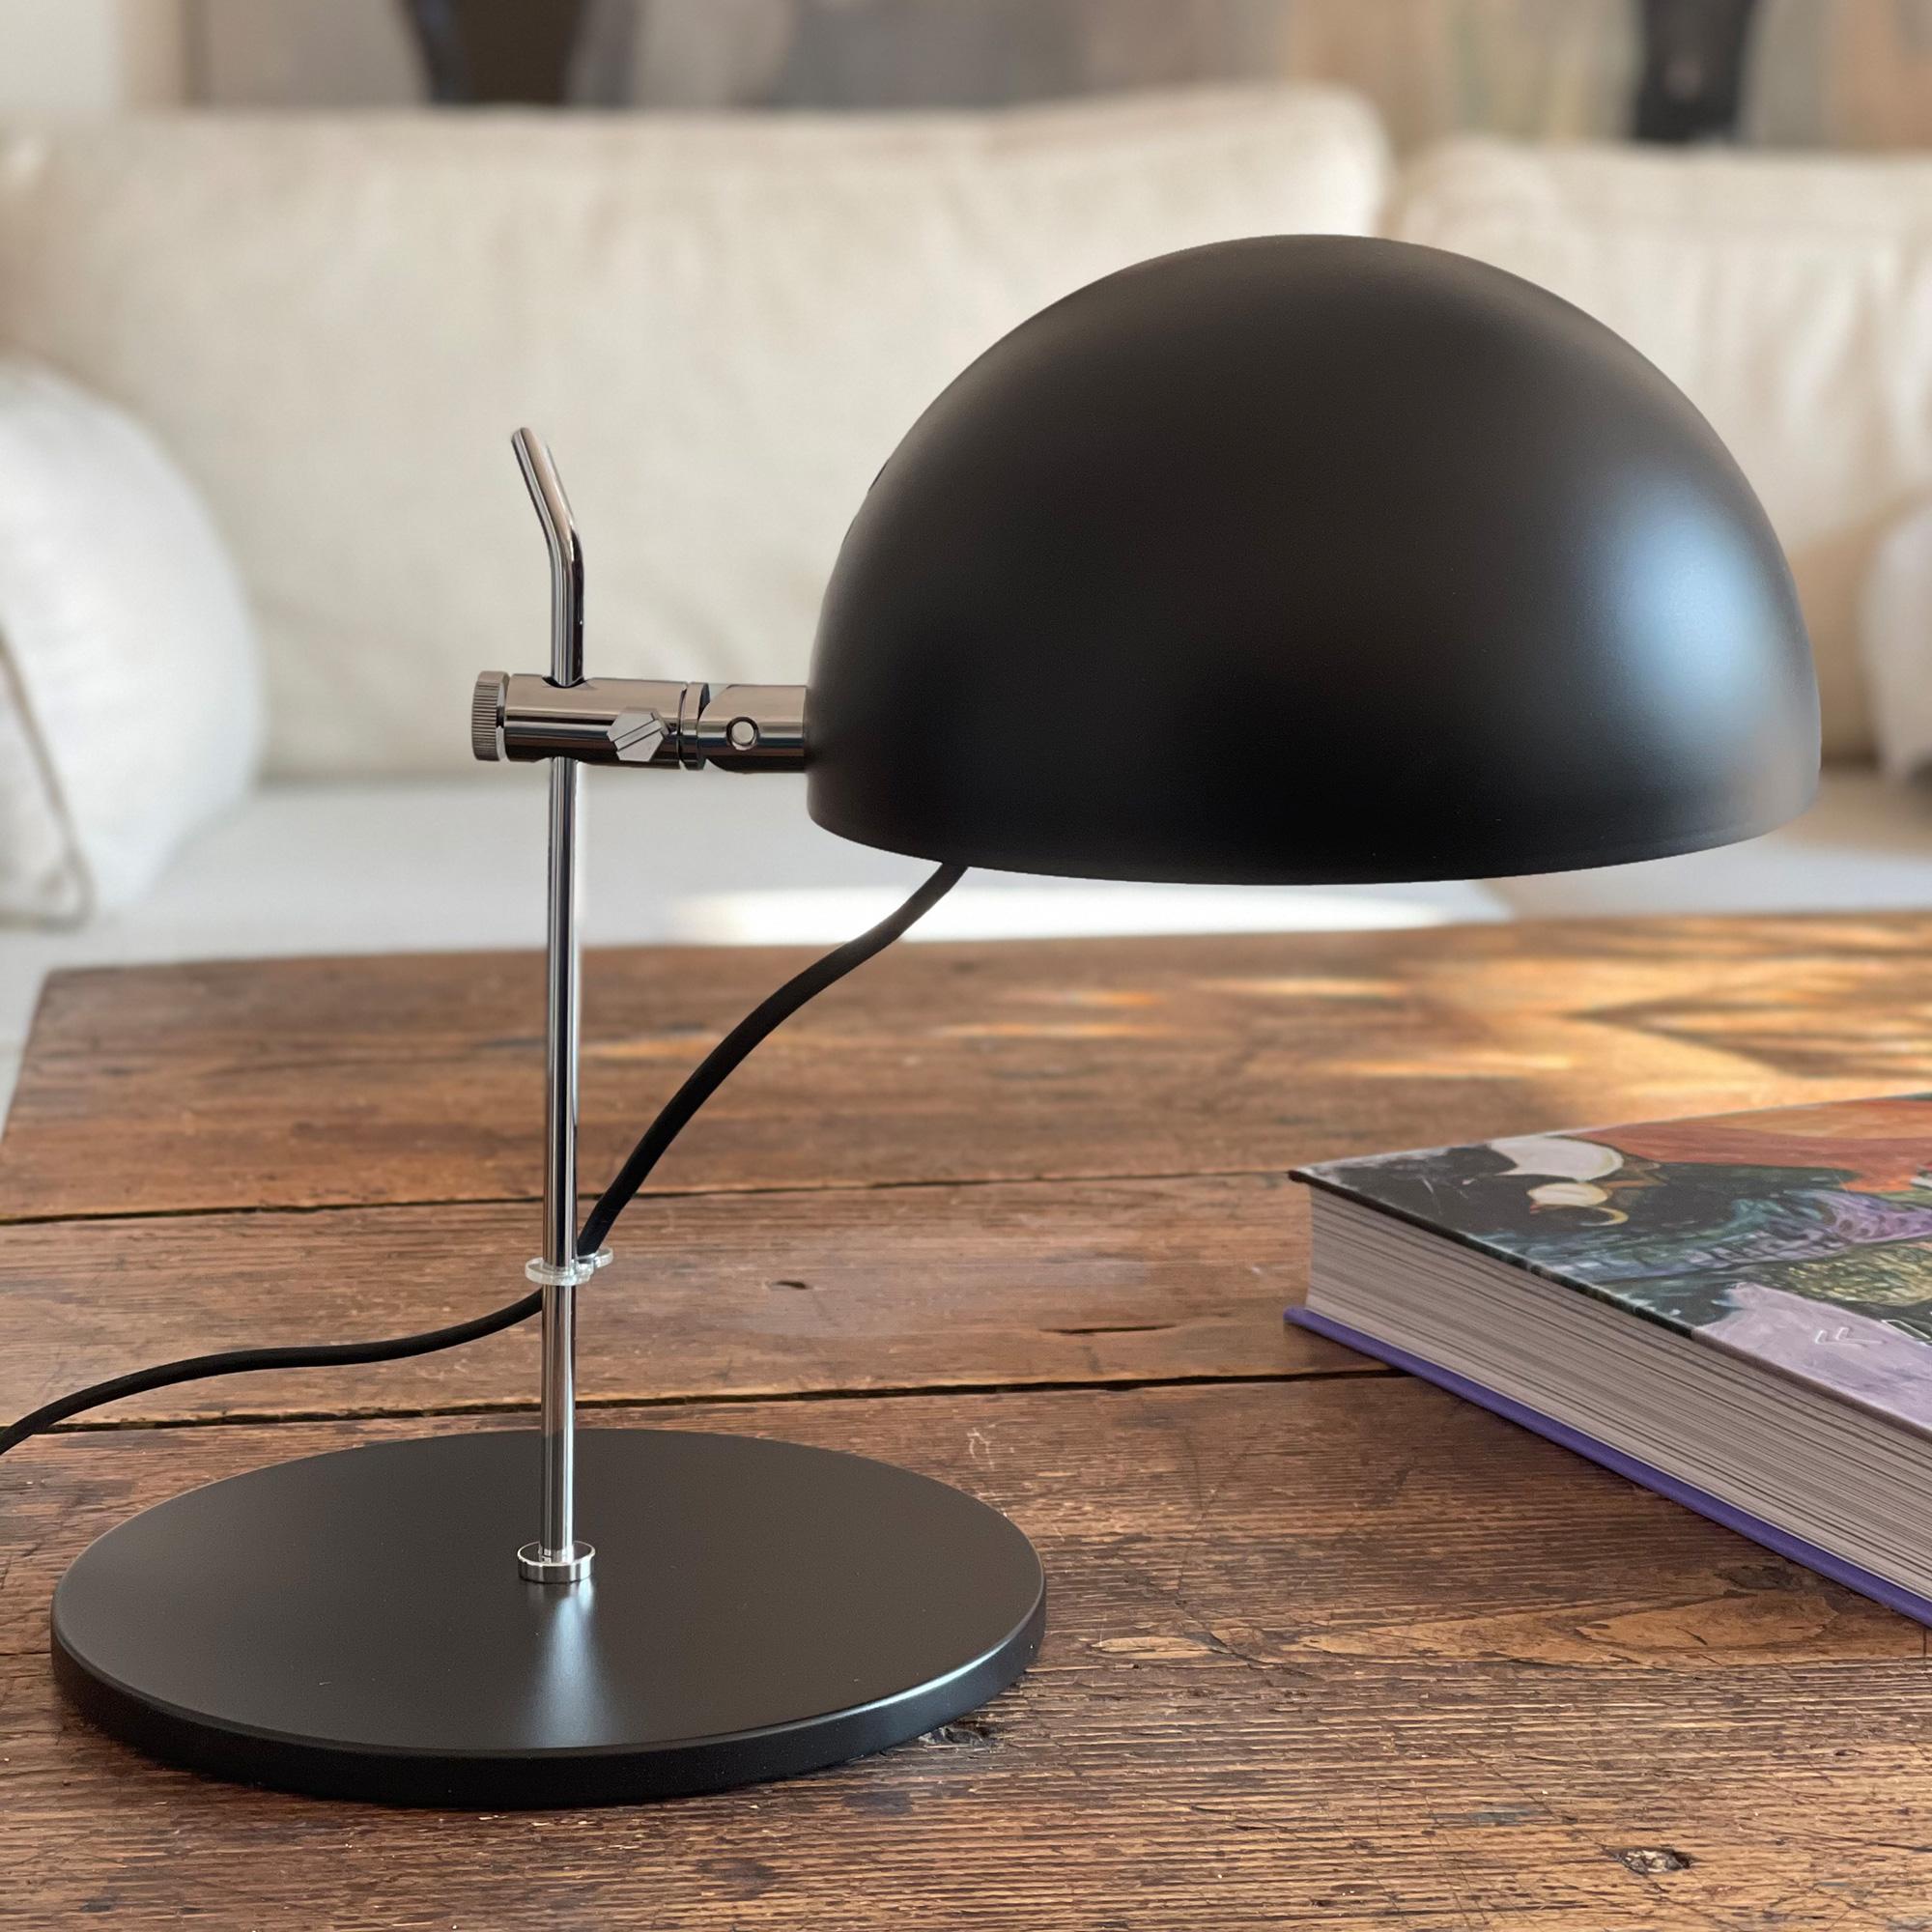 Alain Richard 'A22' desk lamp in black for Disderot.

Executed in black painted metal, this newly produced numbered edition with included certificate of authenticity is made in France by Disderot with many of the same small-scale manufacturing